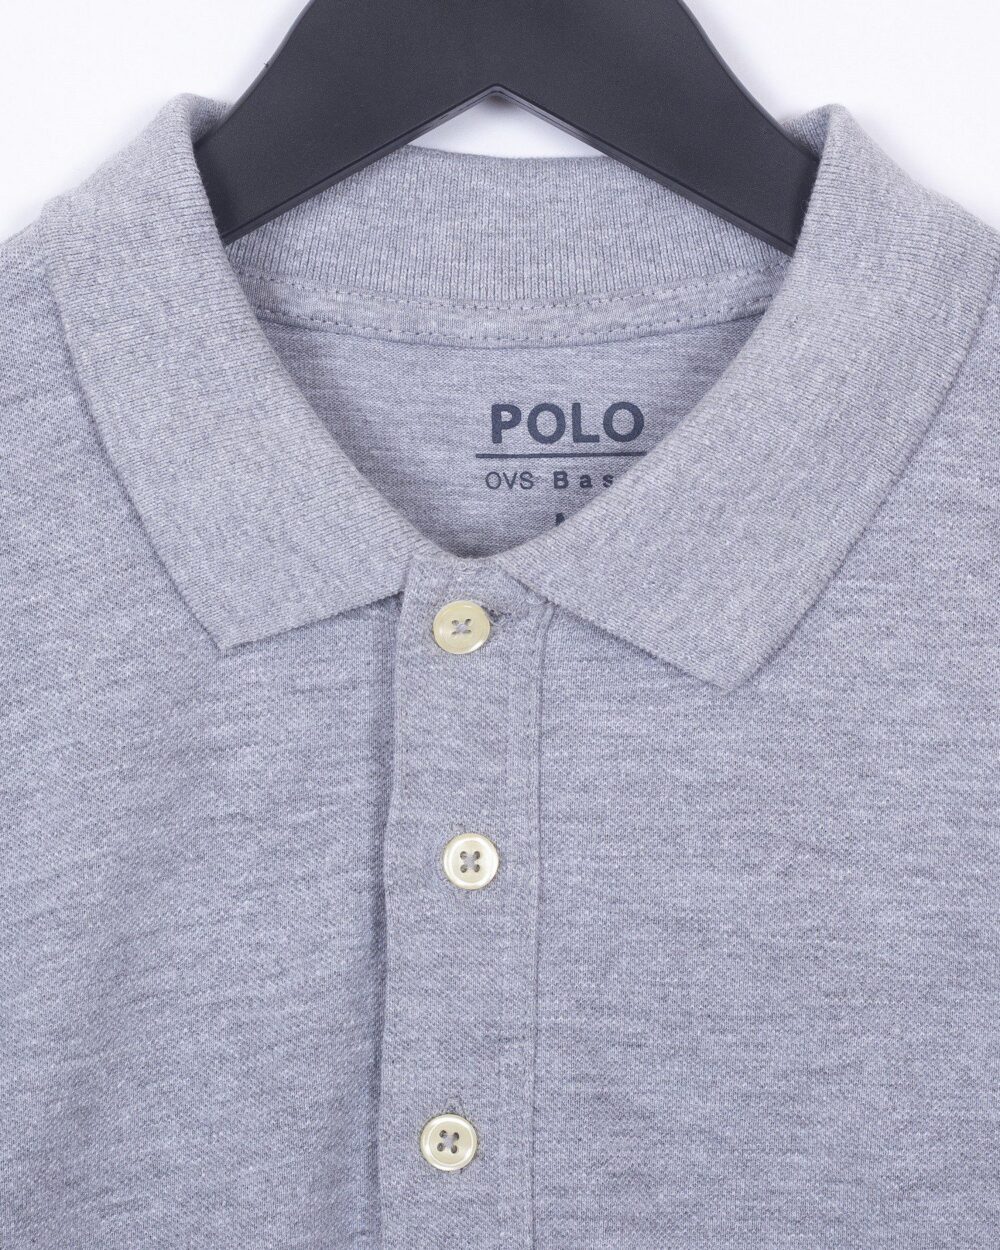 OVS polo homme